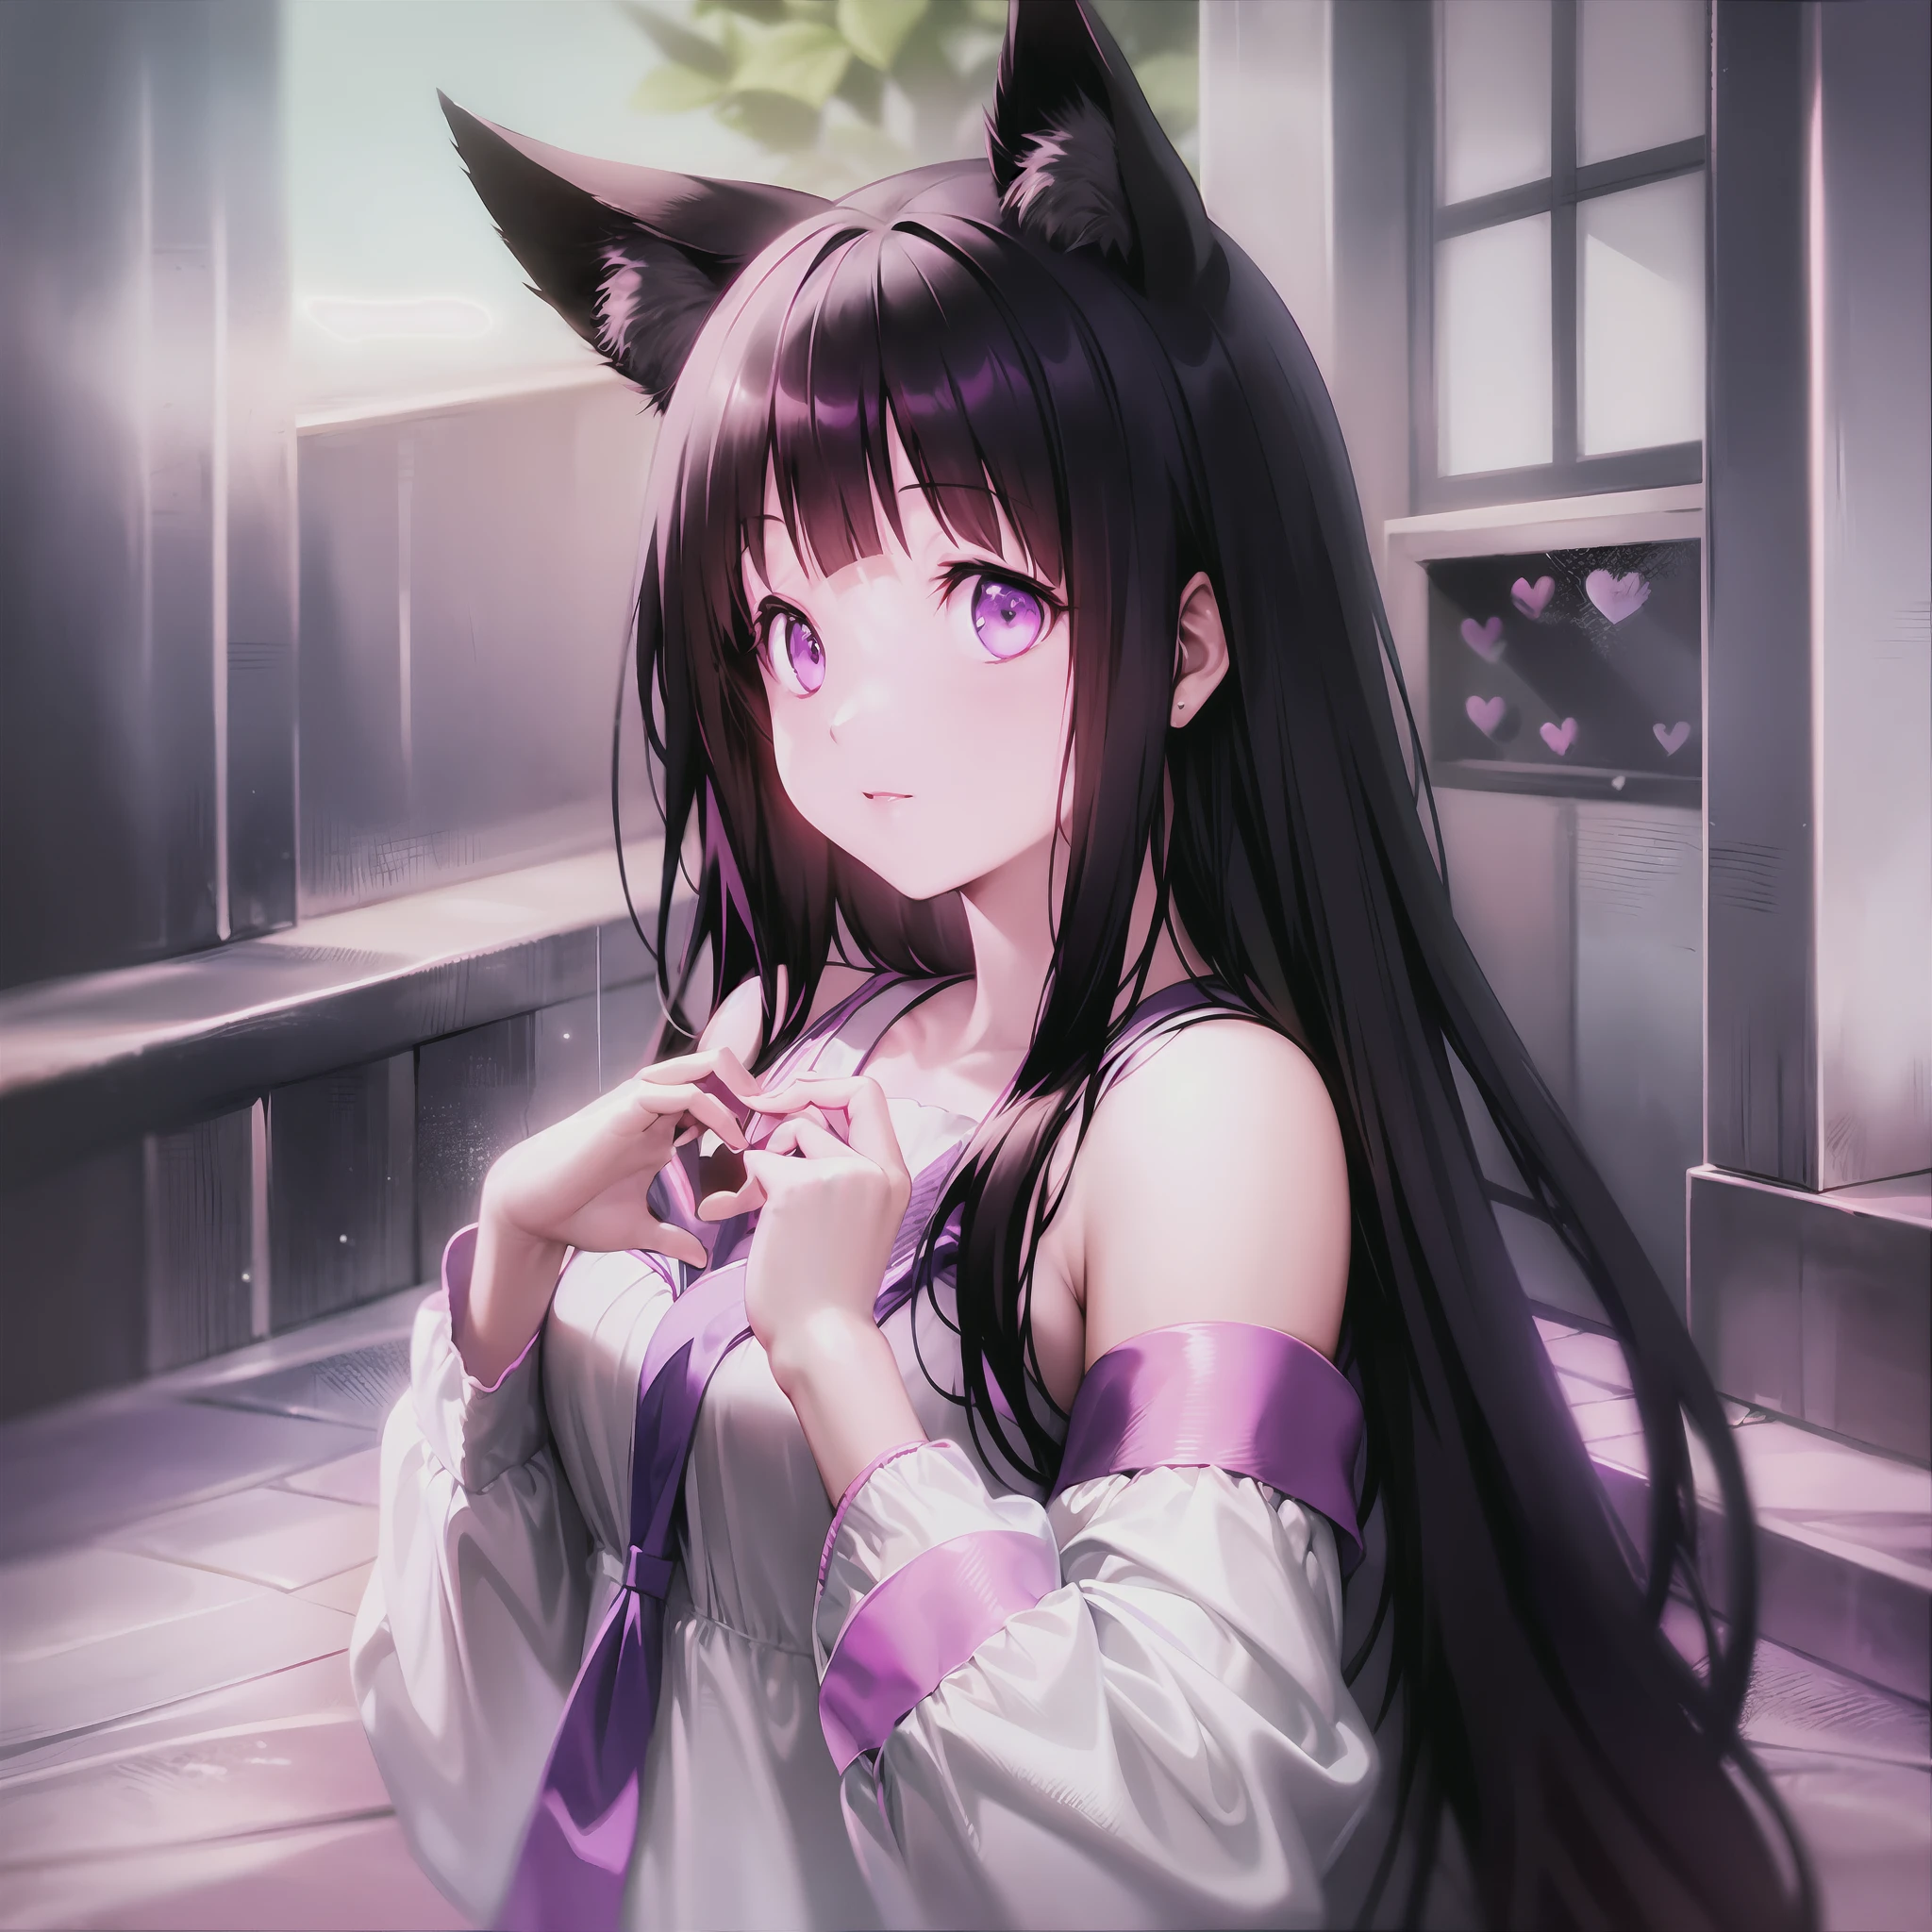 Eru Chitanda with long black hair and purple eyes, makes a heart with your hands